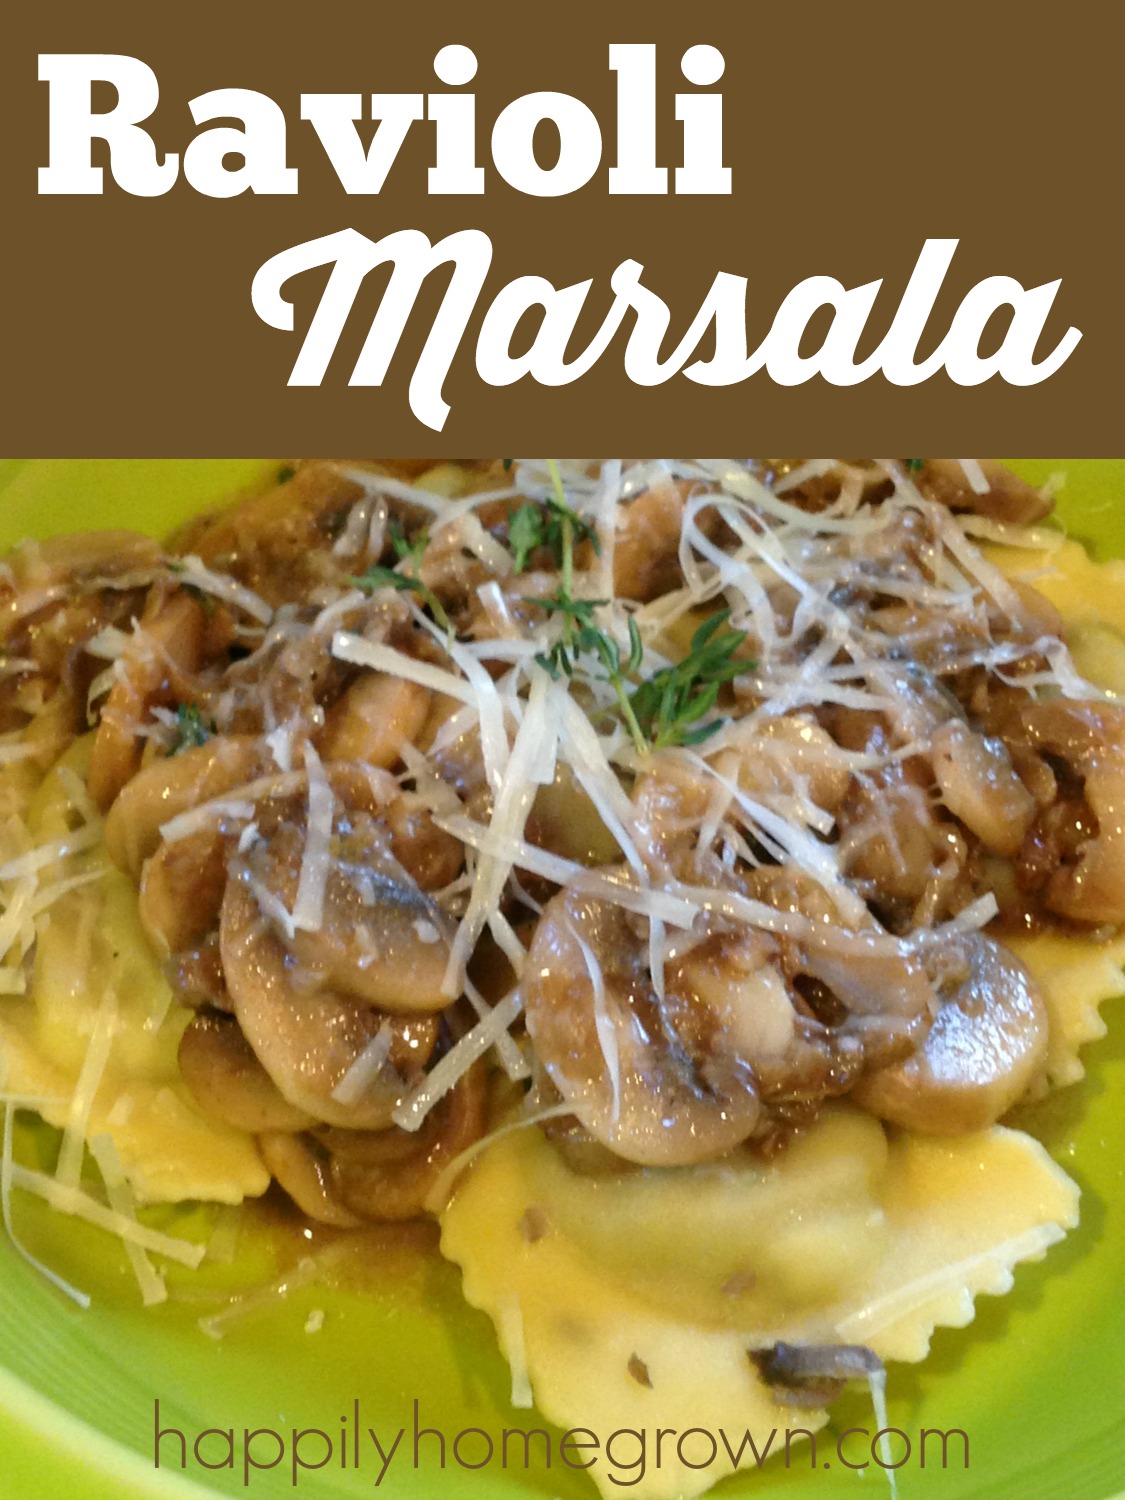 Ravioli Marsala is an elegant, yet easy meal that comes together in only 15 minutes! Pasta and mushrooms, what's not to love!